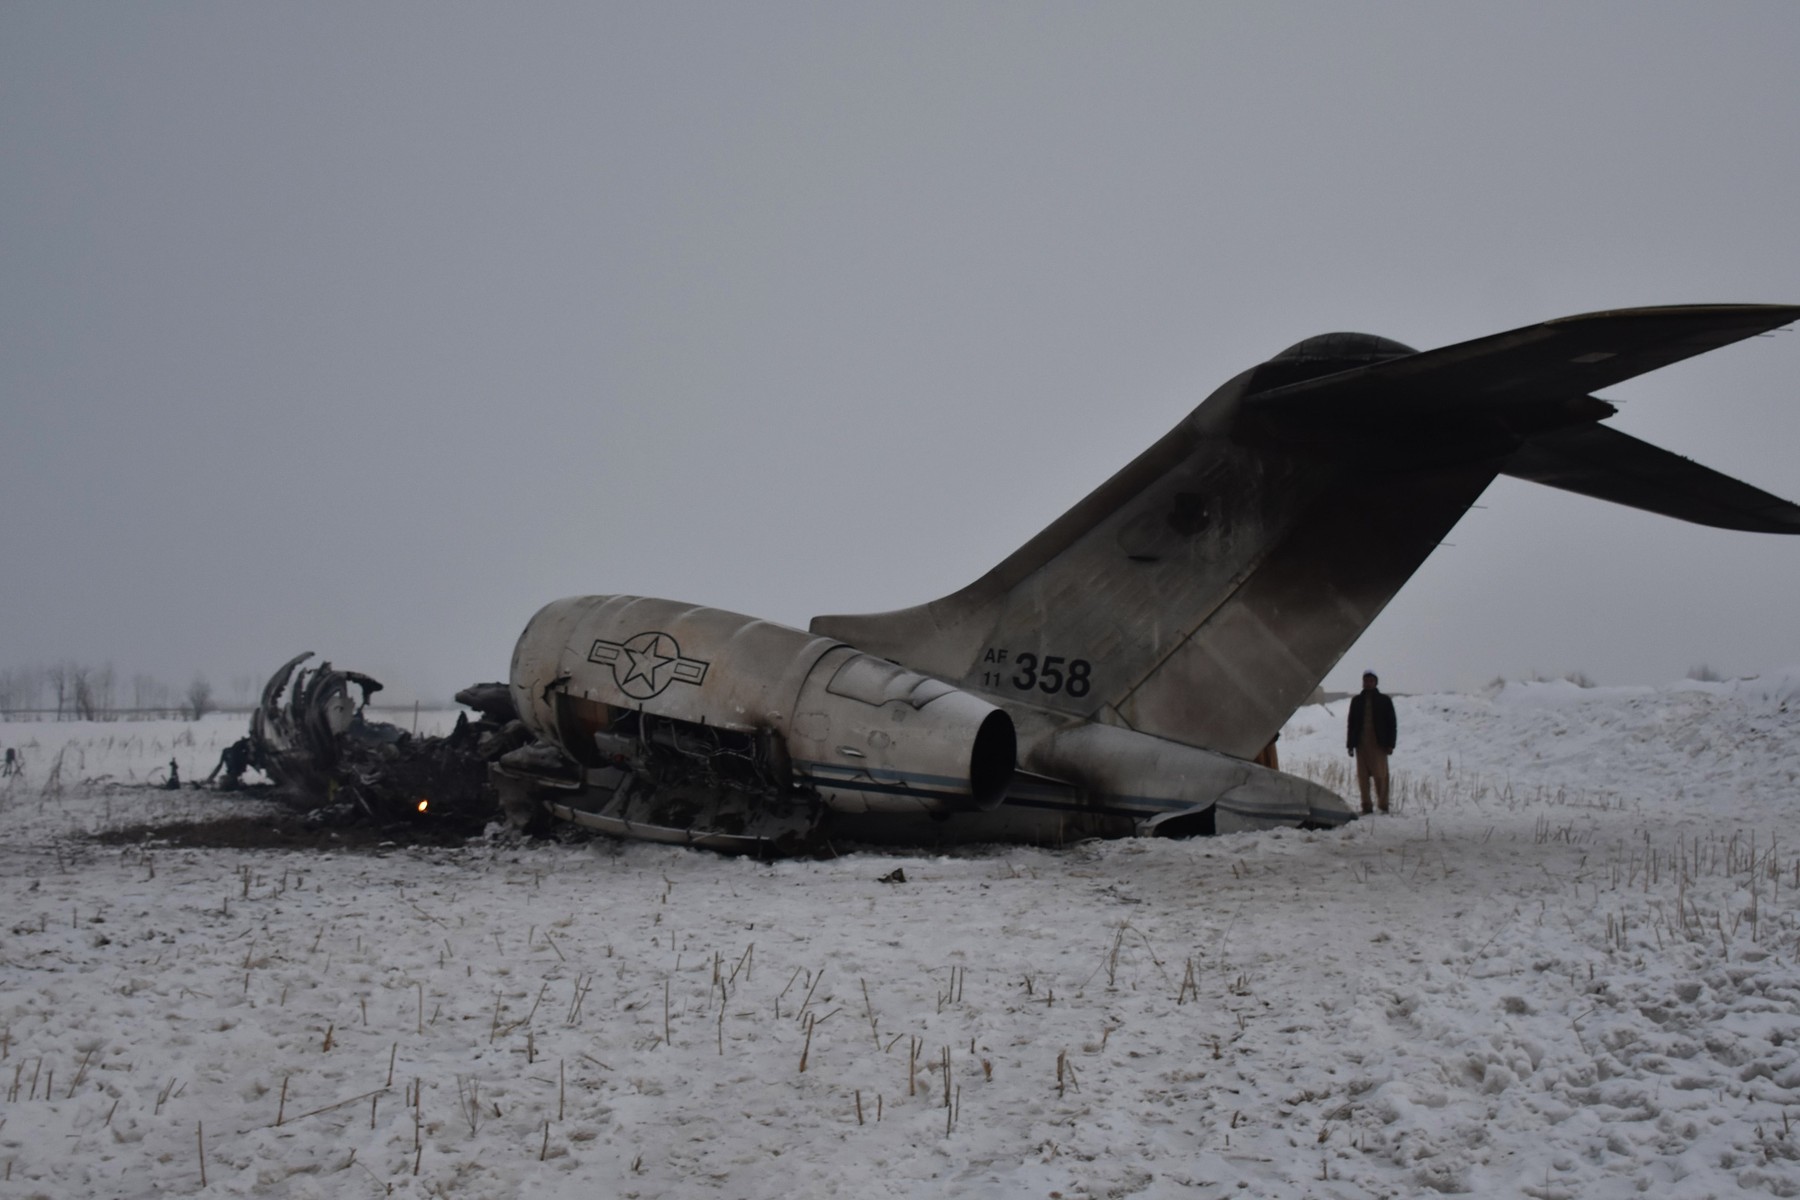 BEIJING, Jan. 28, 2020  Photo taken on Jan. 27, 2020 shows the wreckage of the crashed plane in Deh Yak district of Ghazni province, Afghanistan. The Afghan Taliban claimed Monday that its fighters shot down a U.S. forces' aircraft in eastern Ghazni province. The U.S. military said on Monday that it is monitoring the situation following reports of a U.S. aircraft crash in Afghanistan. (Photo by Saifullah/Xinhua), Image: 495106706, License: Rights-managed, Restrictions: , Model Release: no, Credit line: Saifullah / Zuma Press / Profimedia